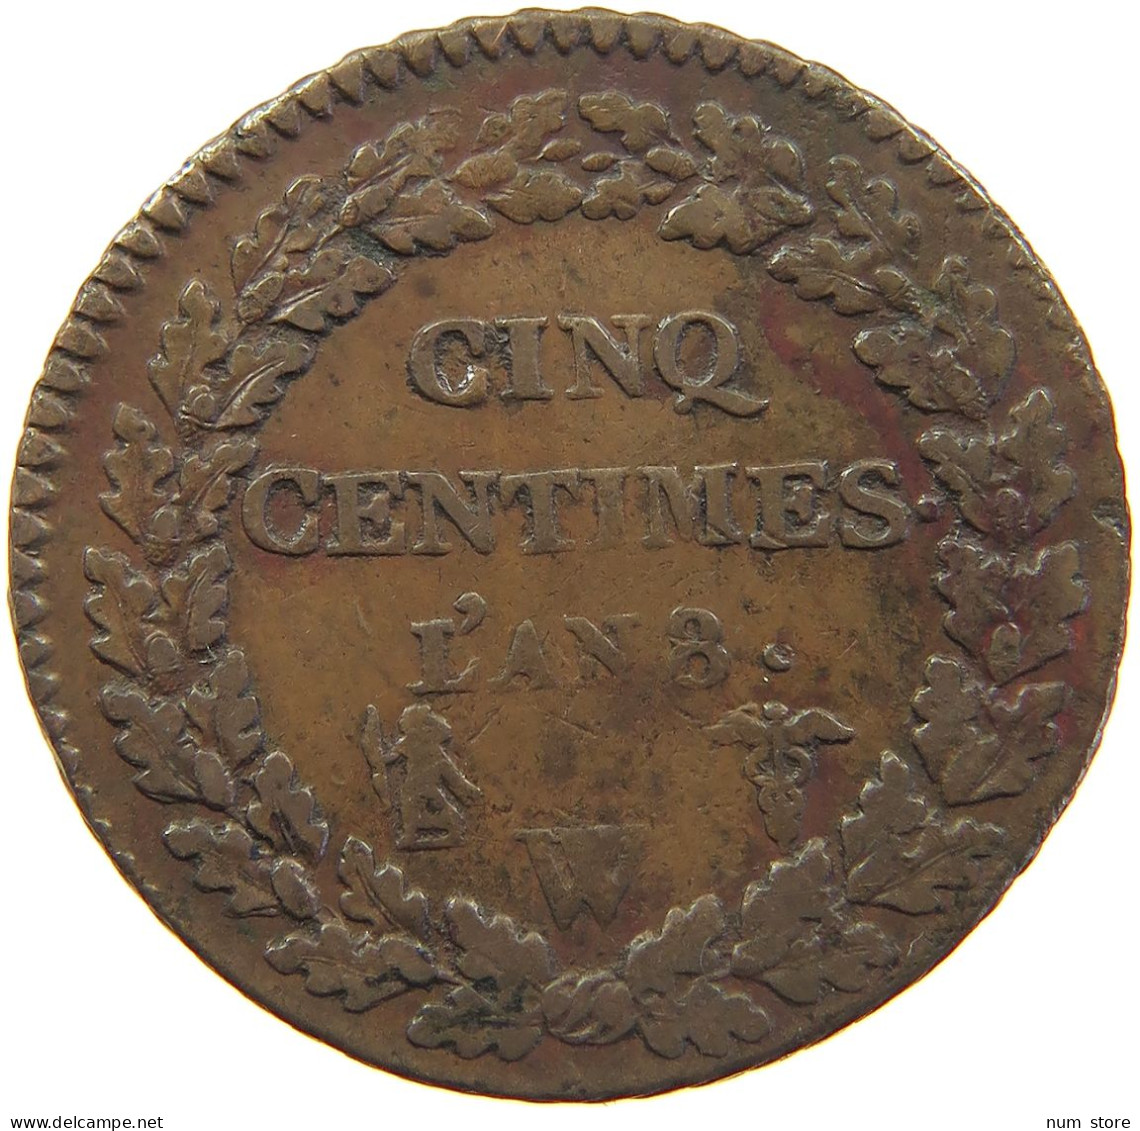 FRANCE 5 CENTIMES AN 8 W  #t016 0157 - 5 Centimes